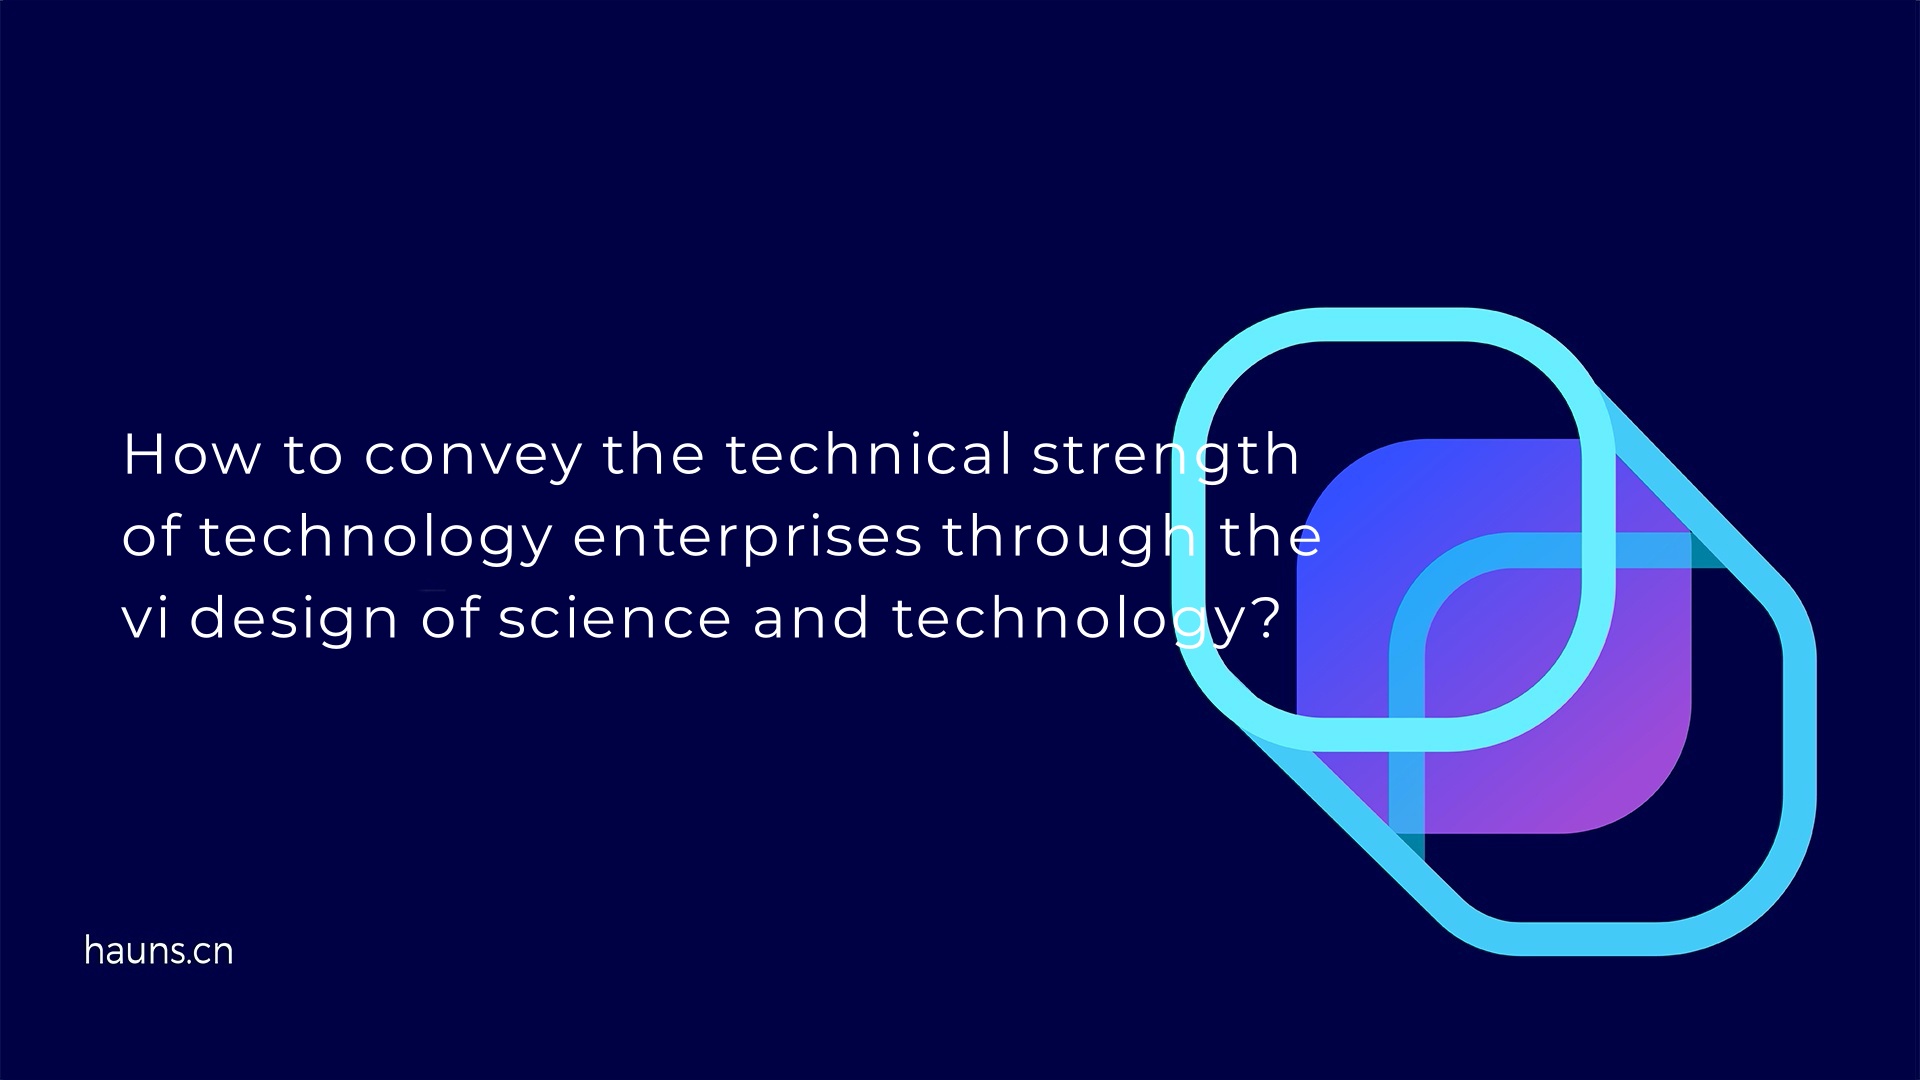 How to convey the technical strength of technology enterprises through the vi design of science and technology?